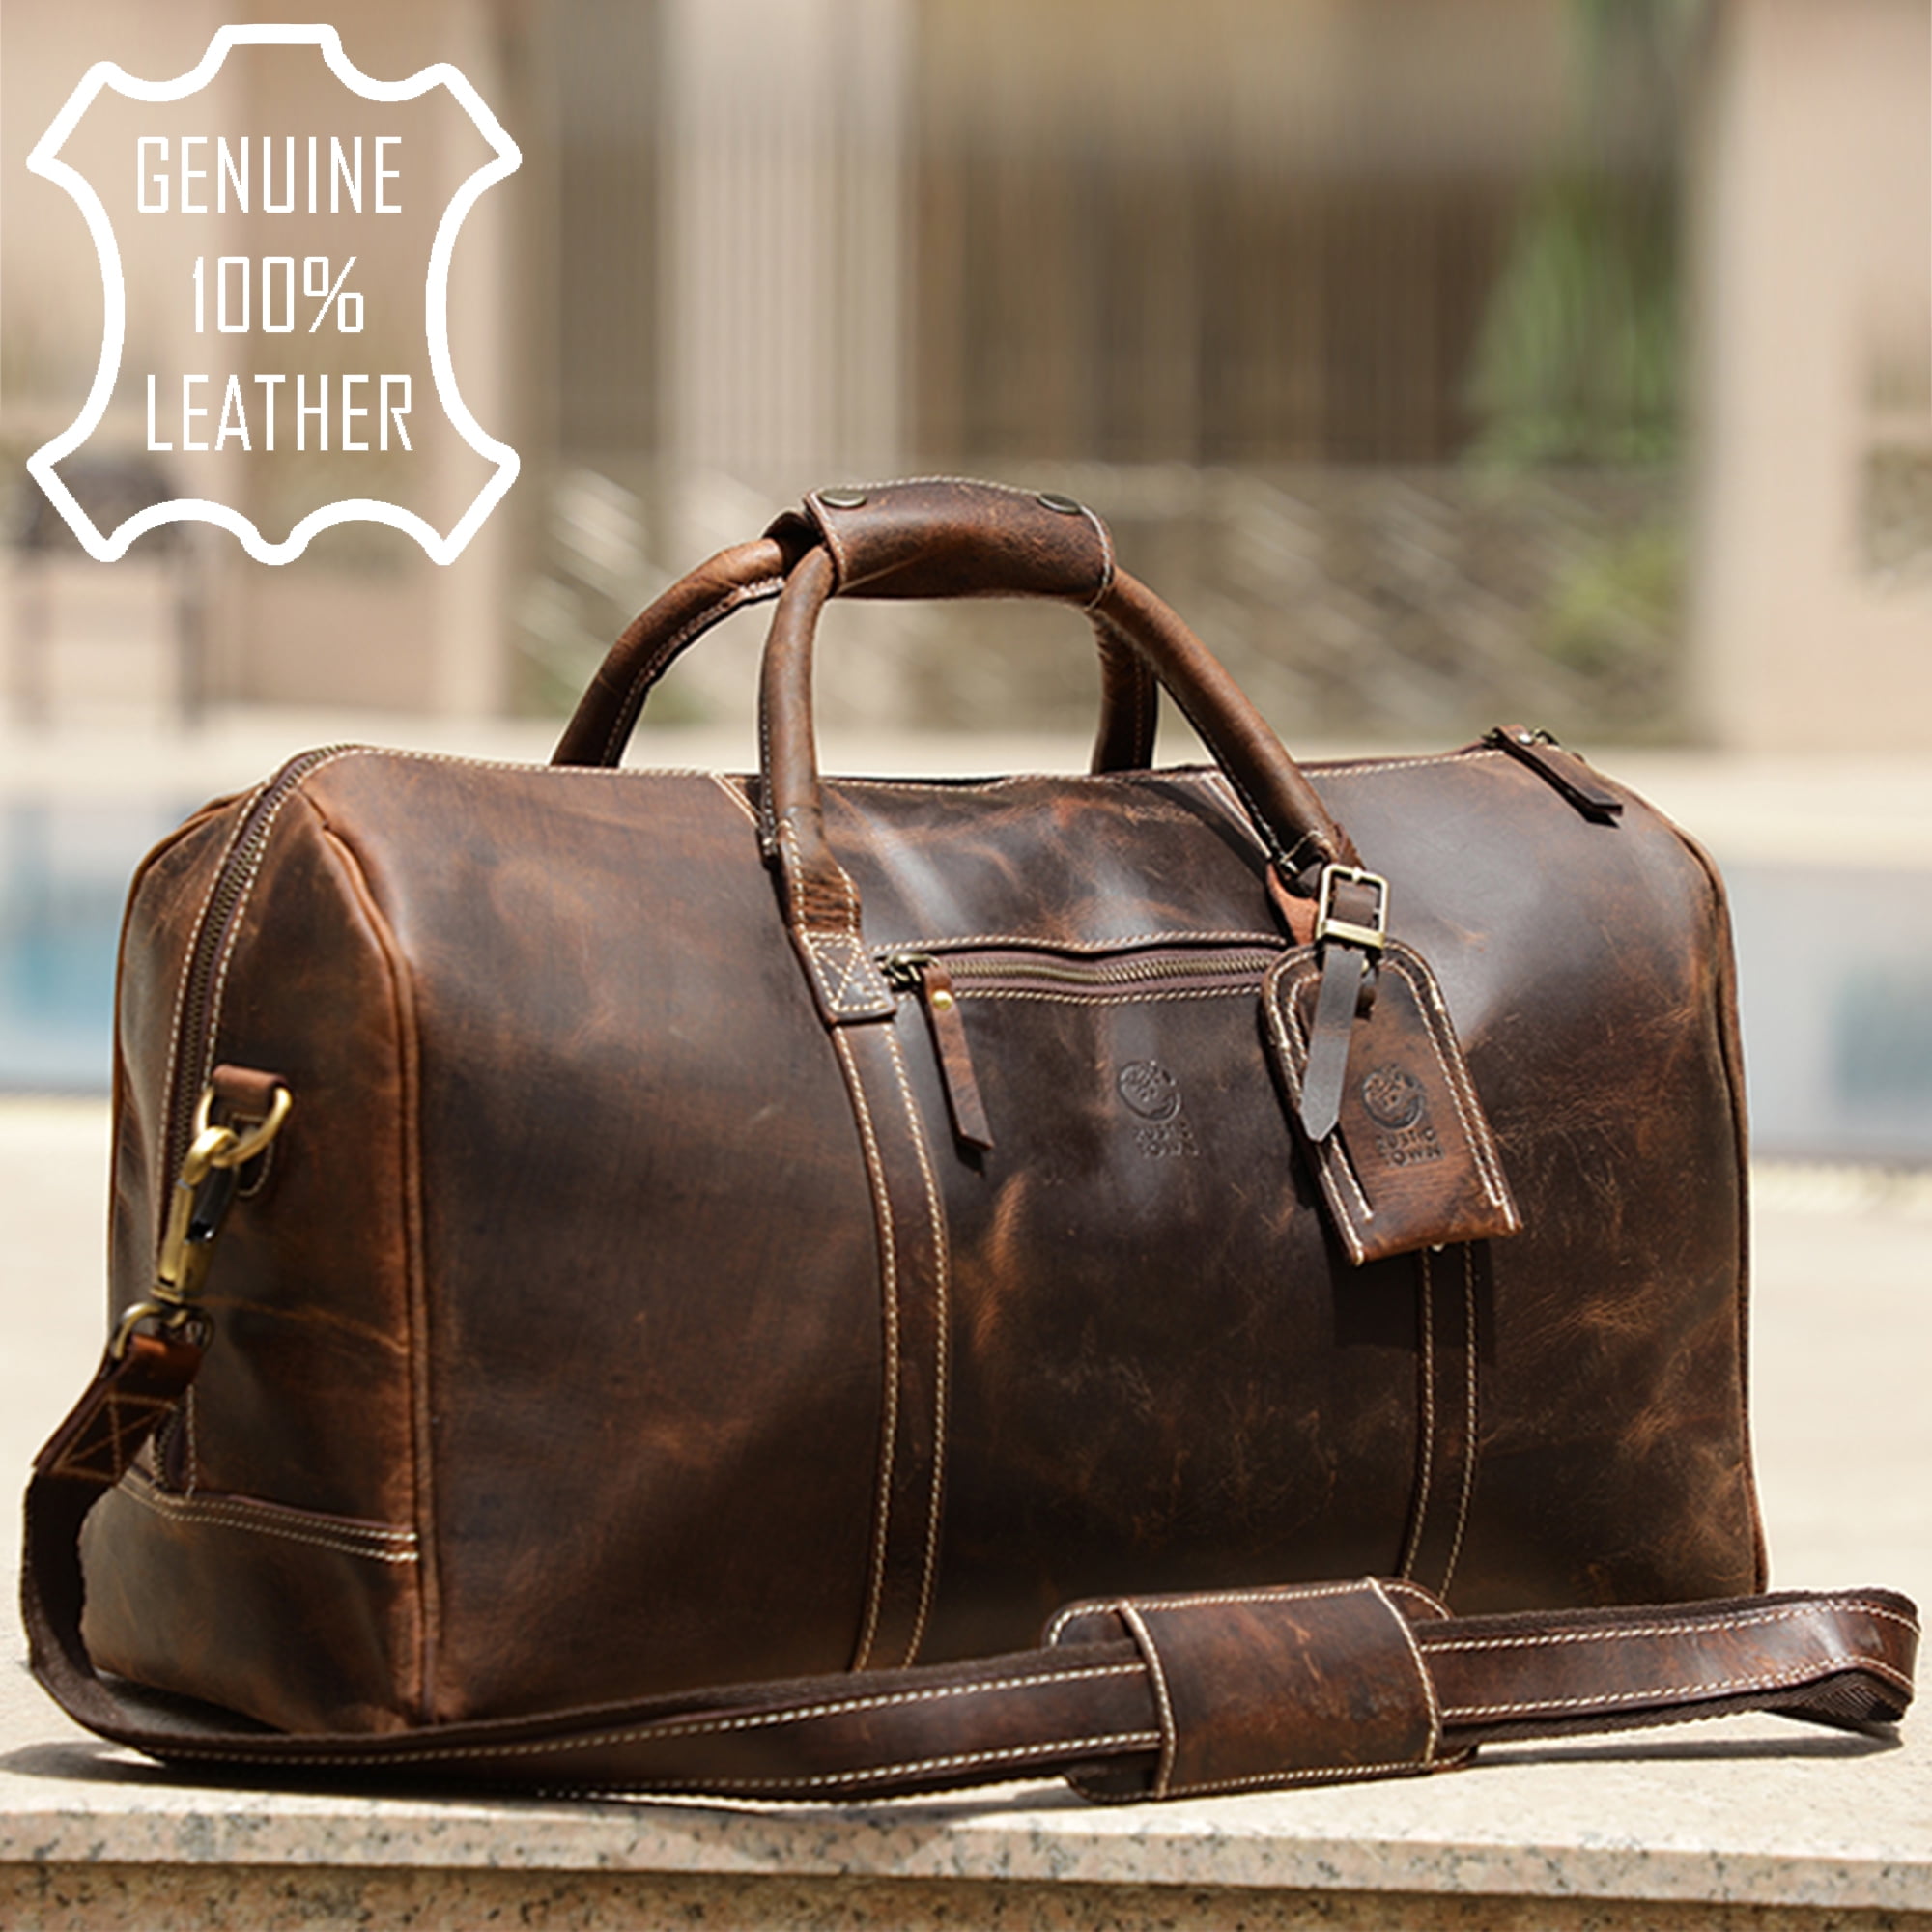 22" Men's Brown Vintage Genuine Leather large Travel Luggage Duffle Gym Bags 